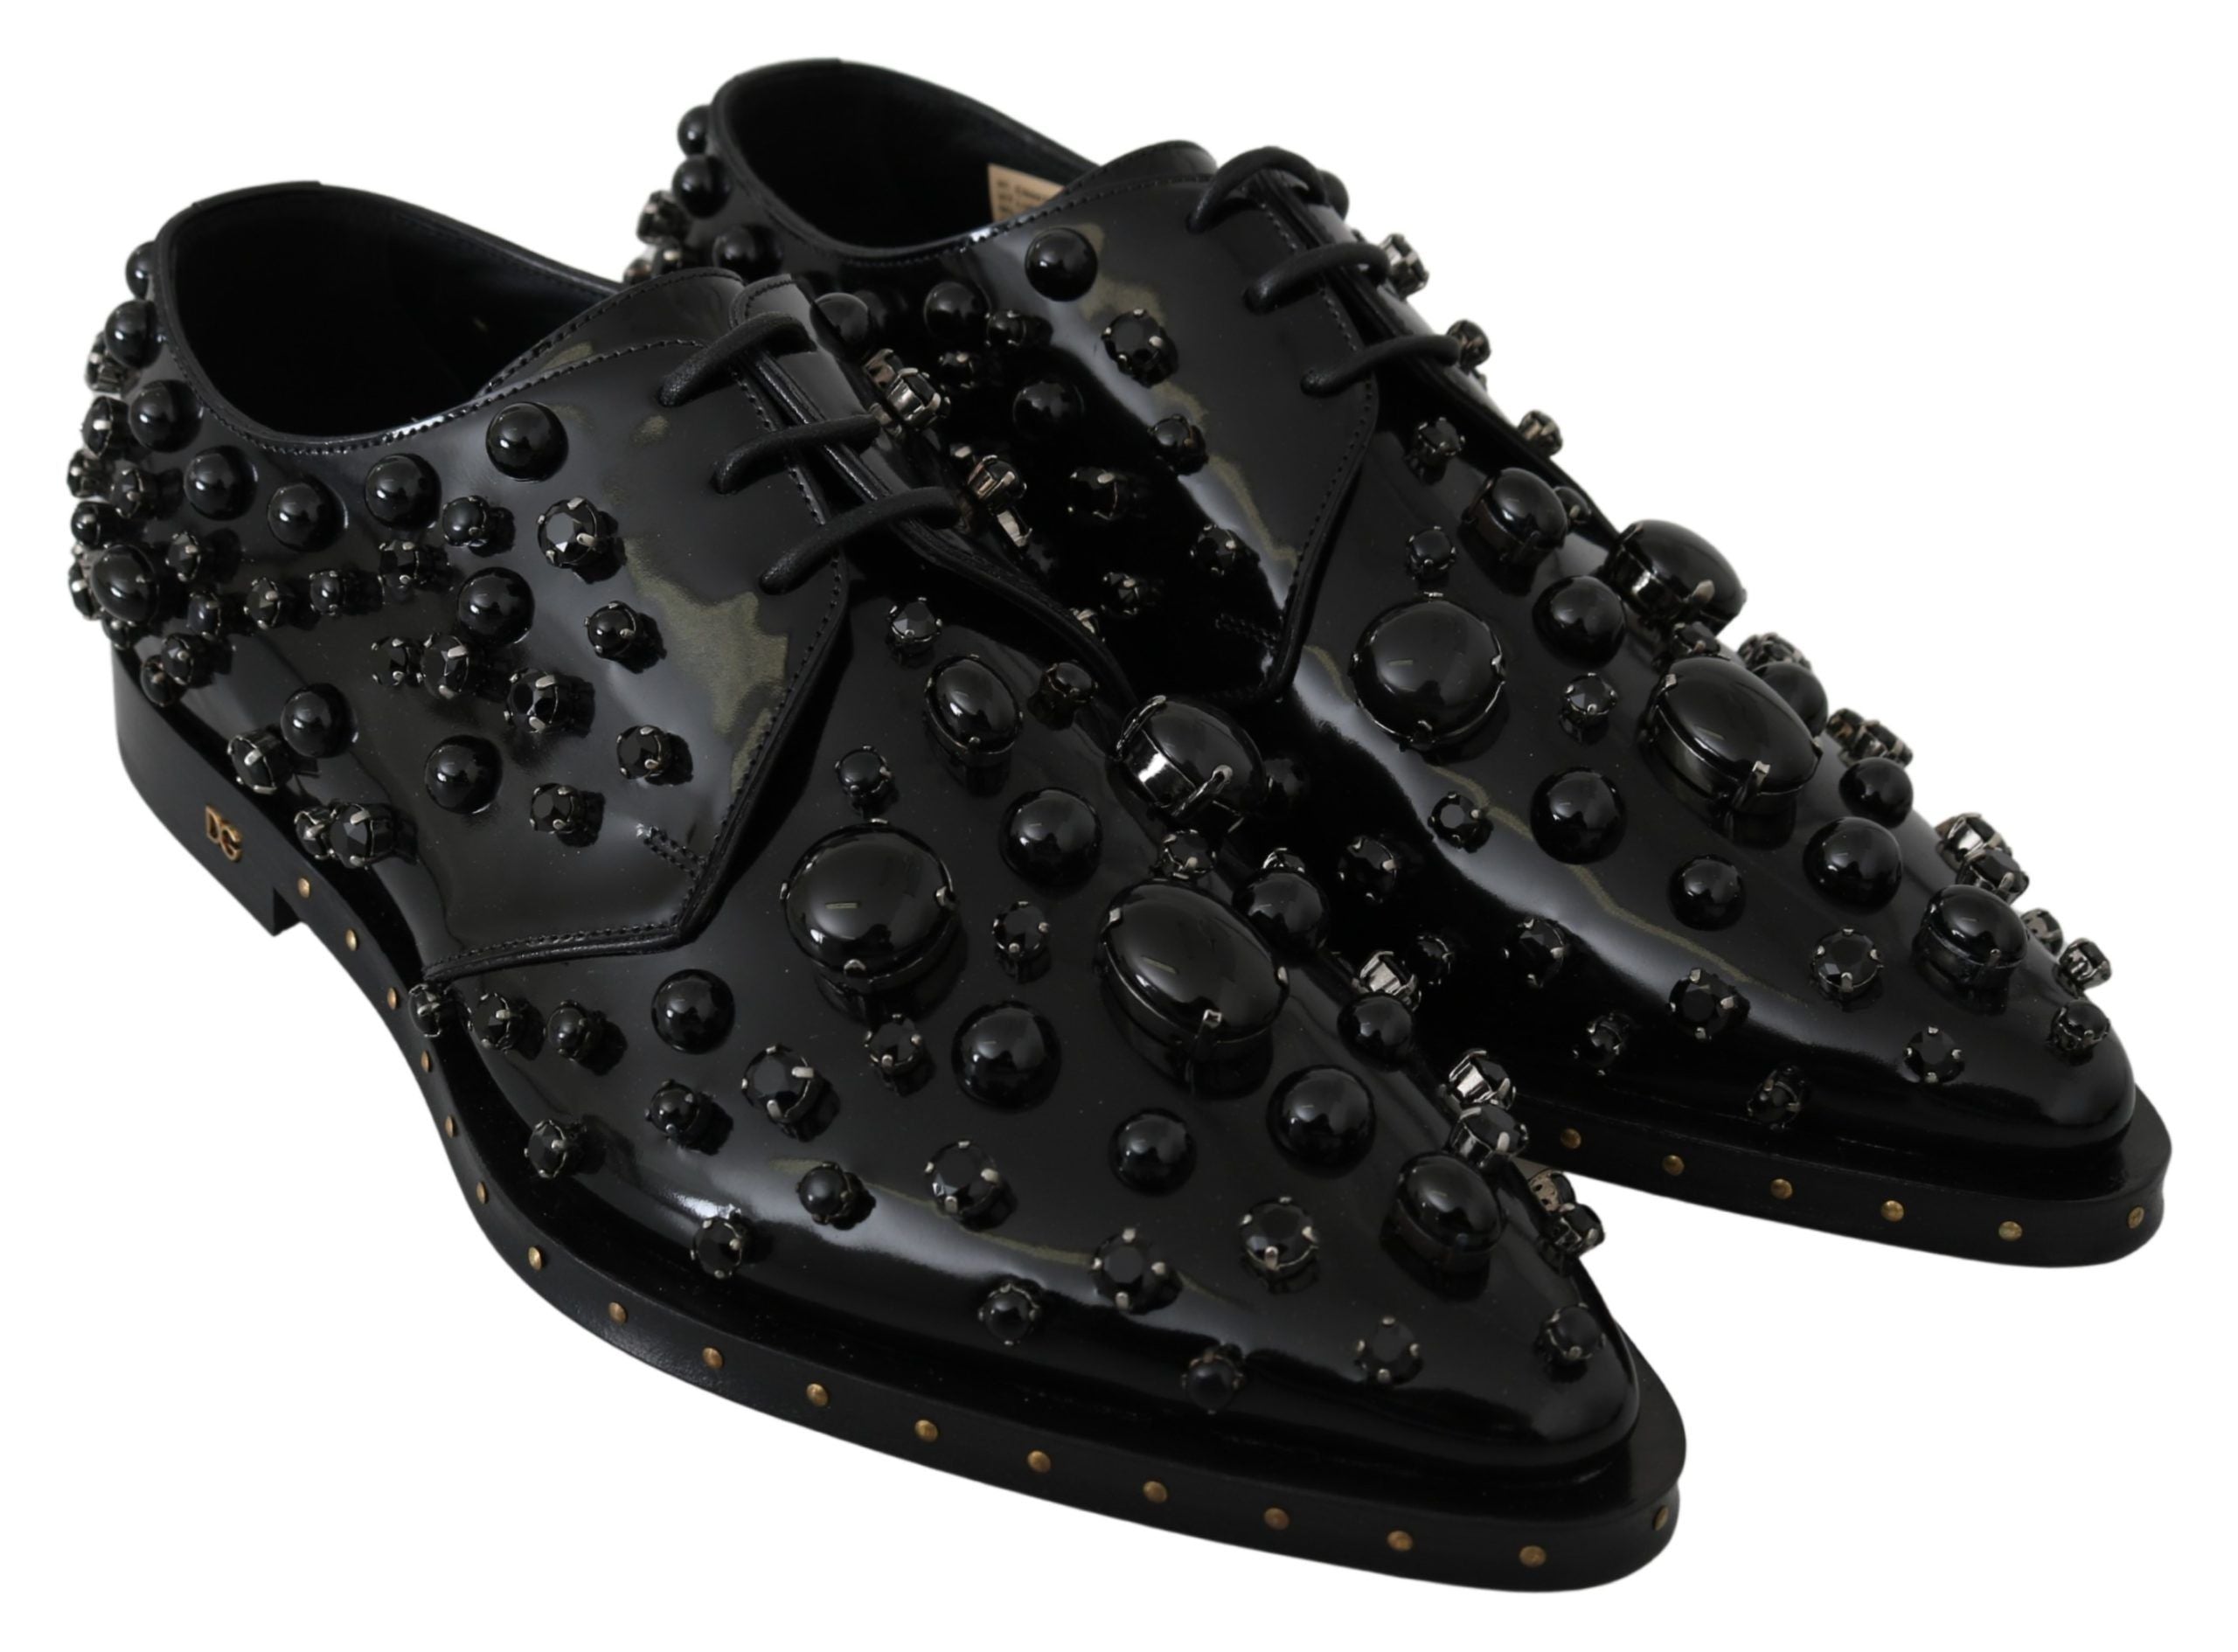 Dolce & Gabbana Black Leather Crystals Dress Broque Shoes